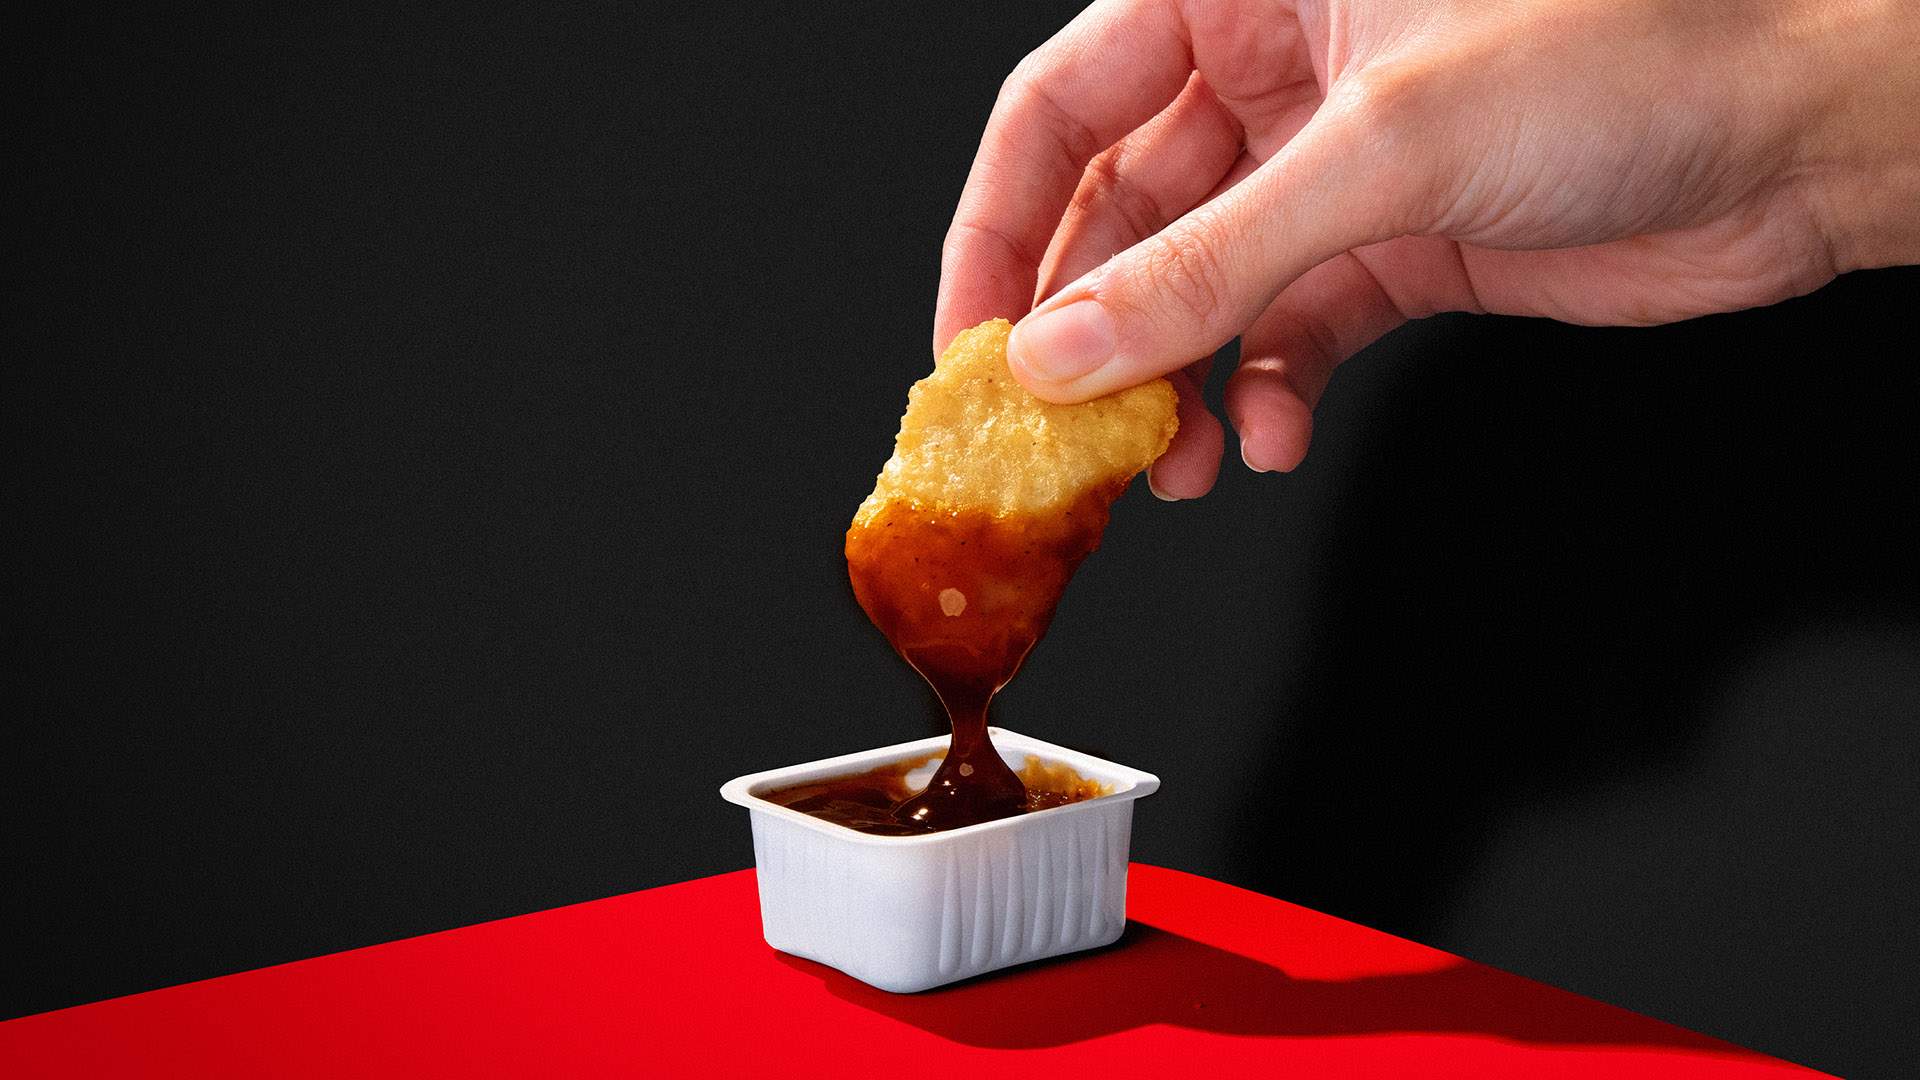 McDonald's Is Giving Away One Million Chicken Nuggets Across New Zealand for One Day Only